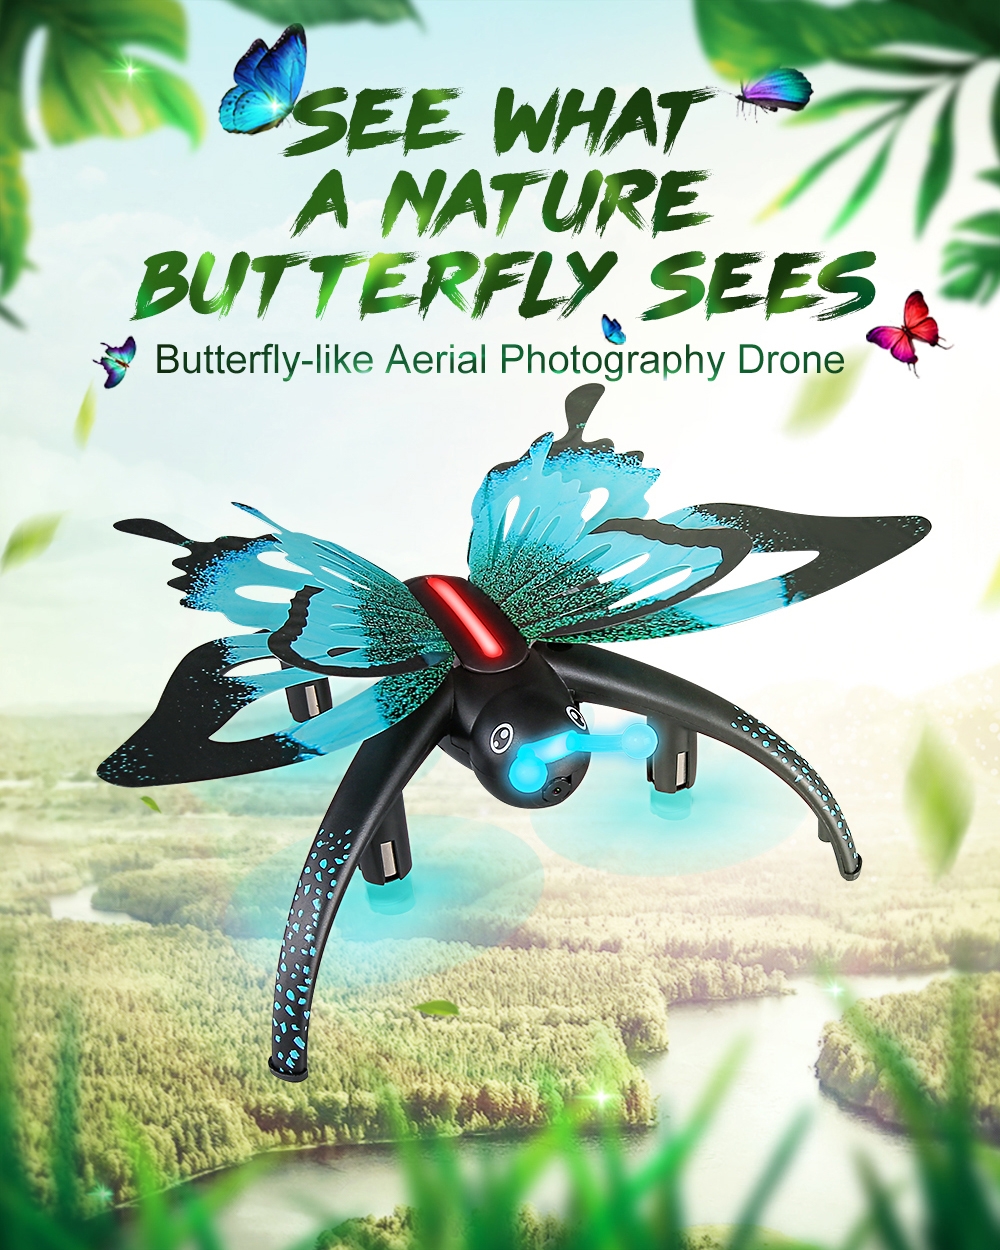 JJRC H42WH WIFI FPV Voice Control Altitude Hold Mode Butterfly-like RC Drone Quadcopter